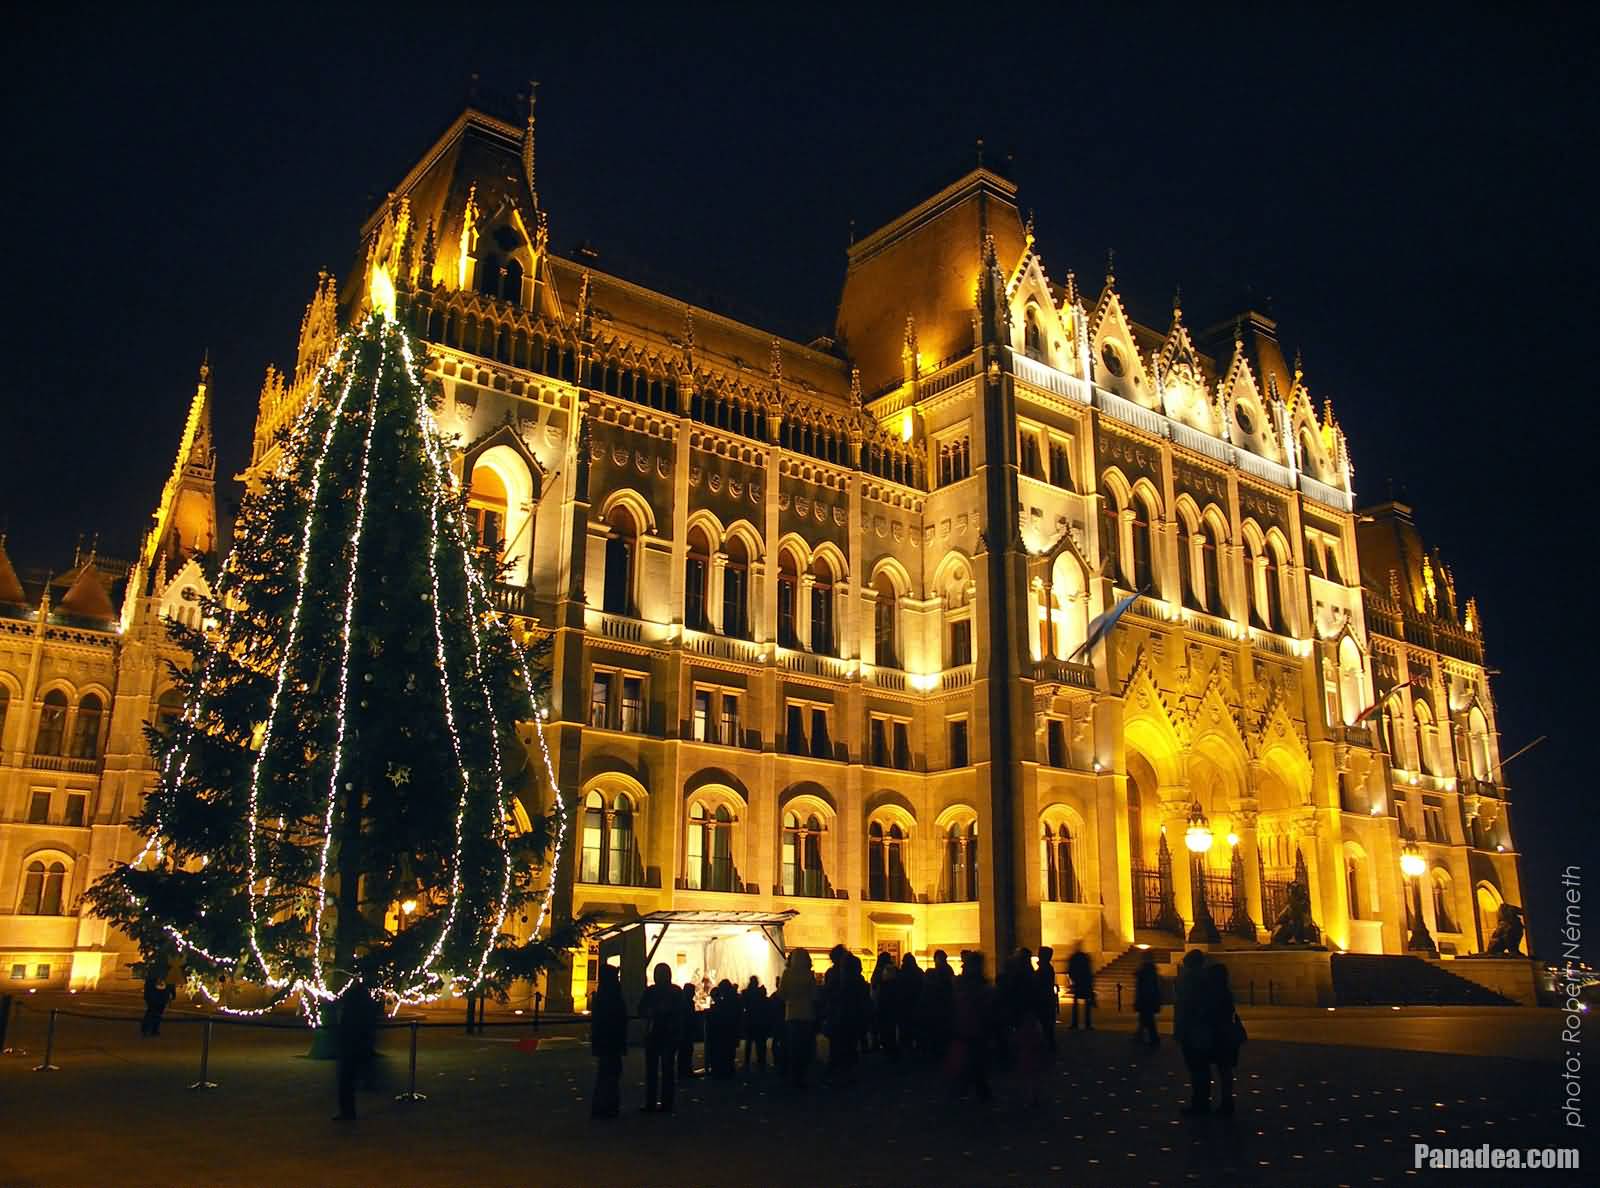 Decorated Christmas Tree In Front Of Hungarian Parliament Building At Night